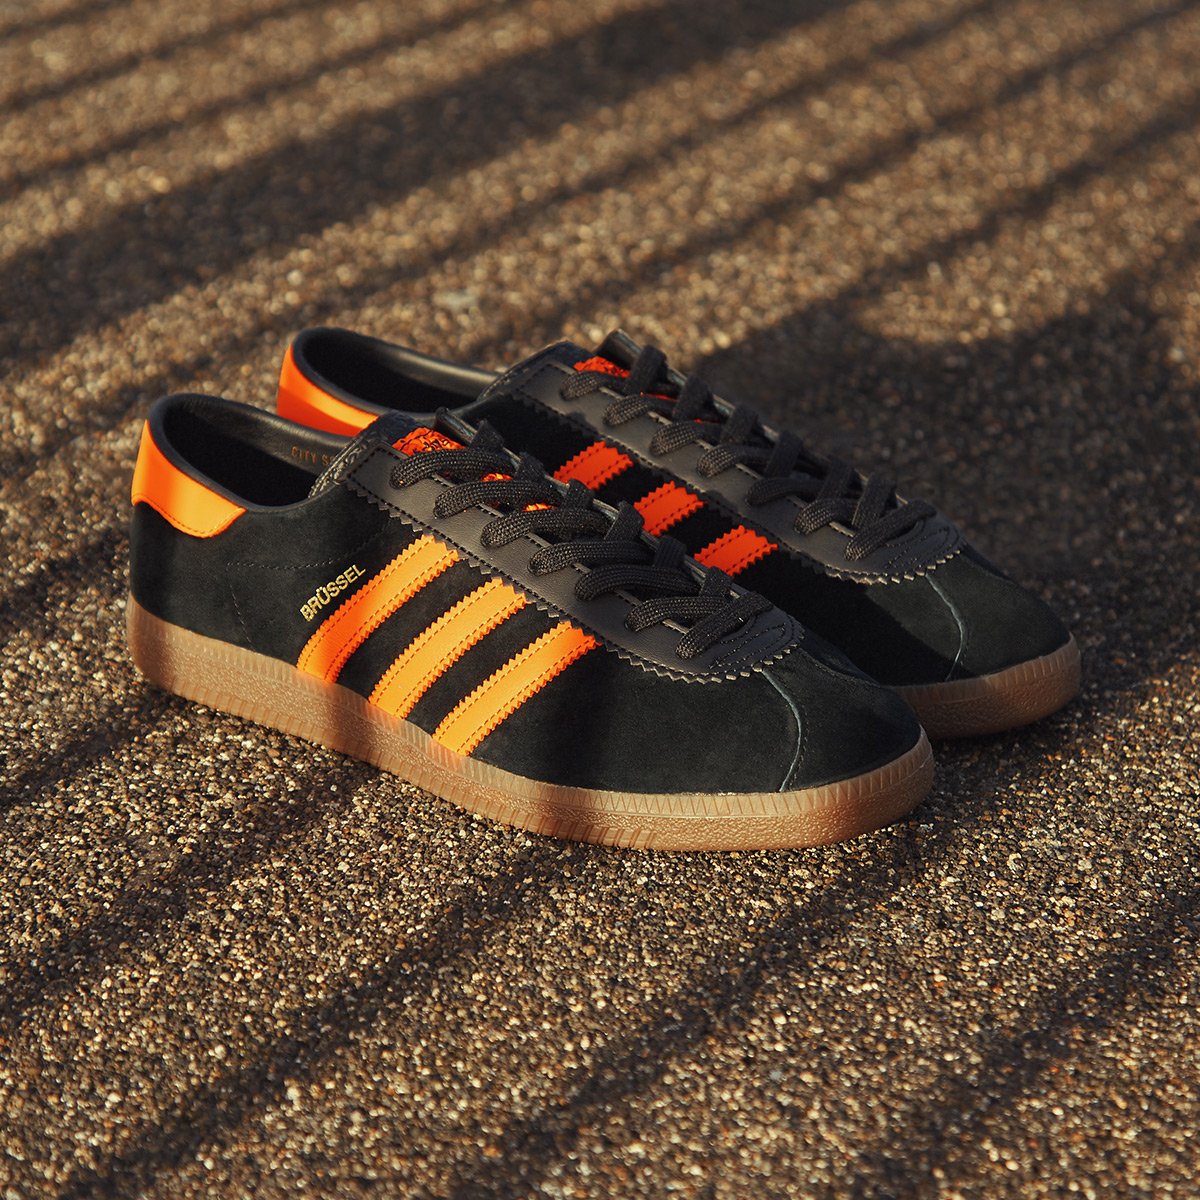 on Twitter: adidas Brussels is available in-store today (£89). https://t.co/X3XTEcFOCV https://t.co/oGwTgyFZRo" / Twitter